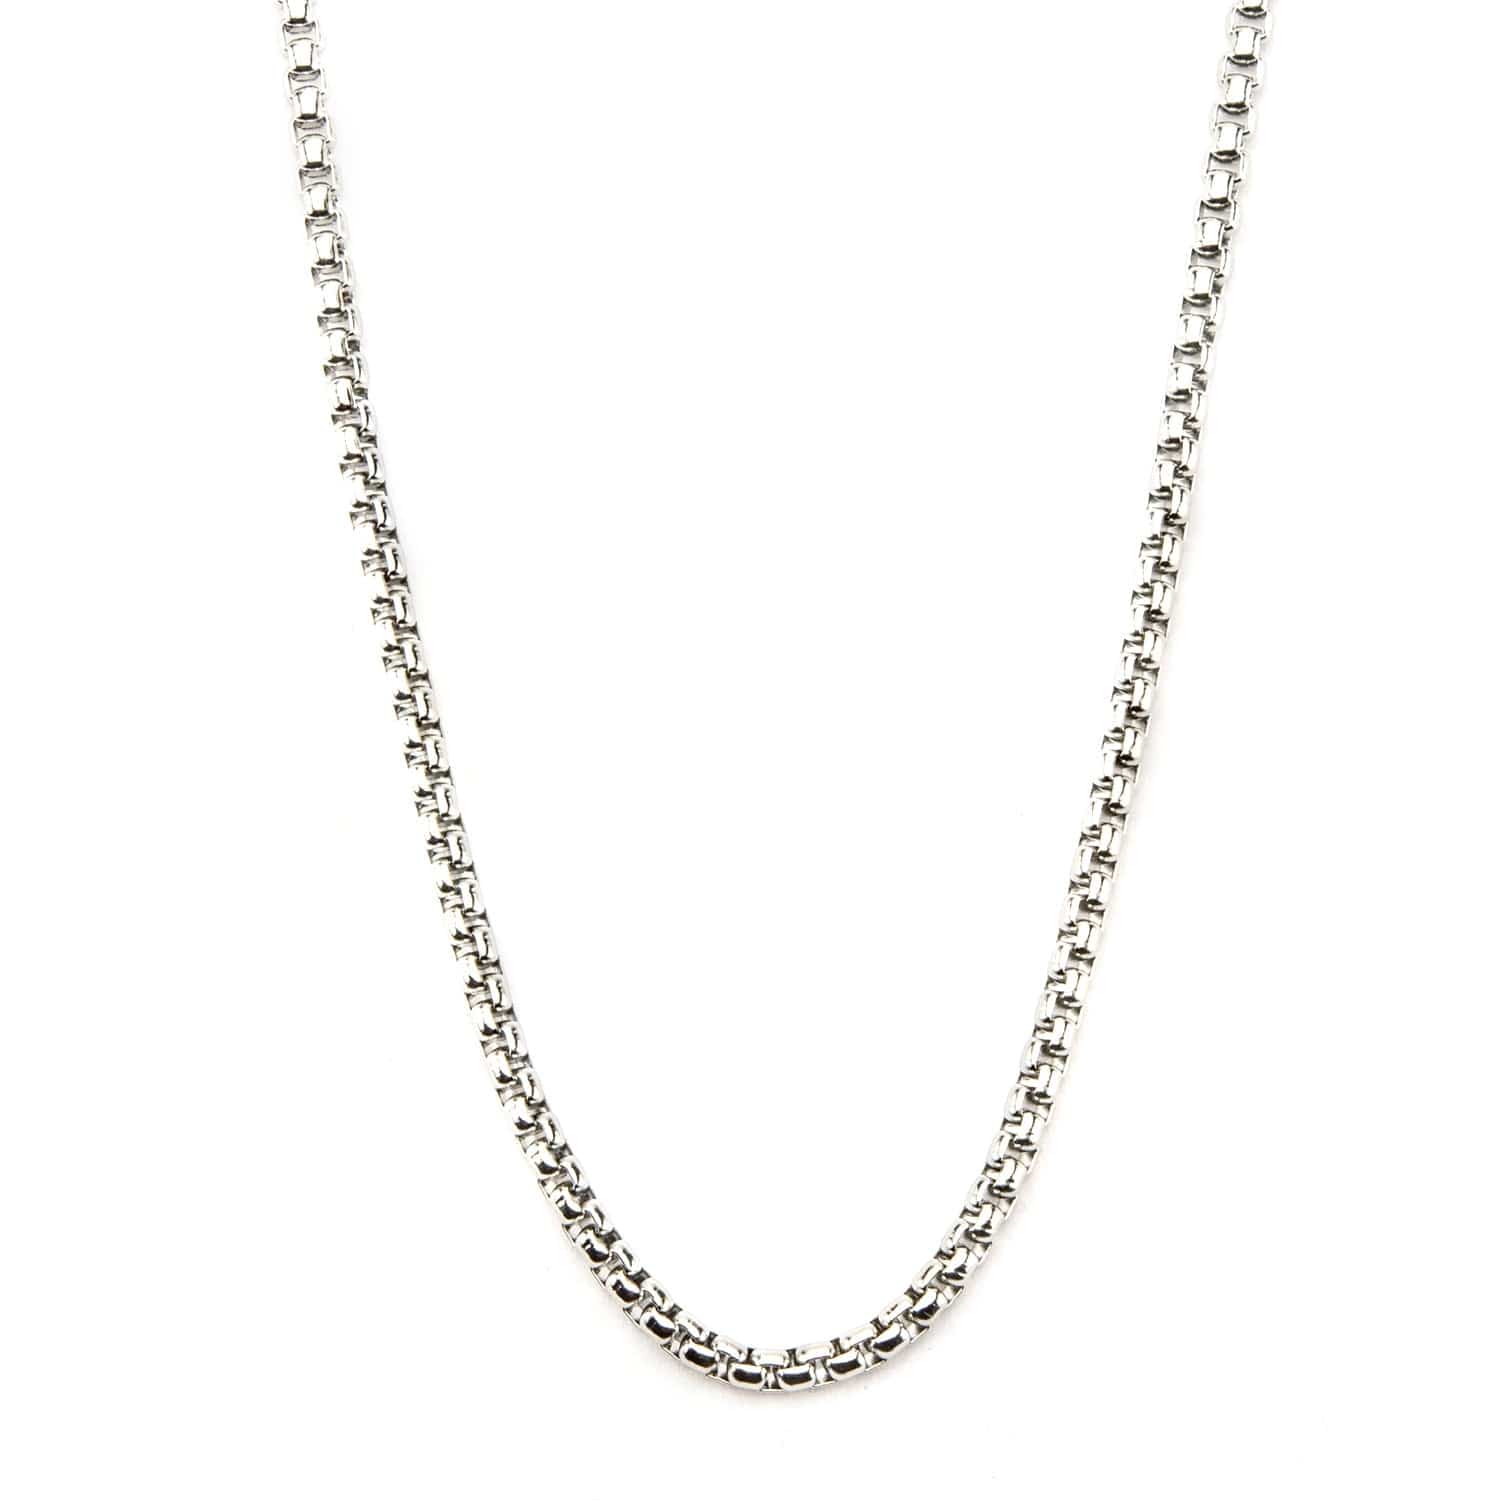 INOX JEWELRY Chains Silver Tone Stainless Steel Polish Finish 3mm Bold Box Chain